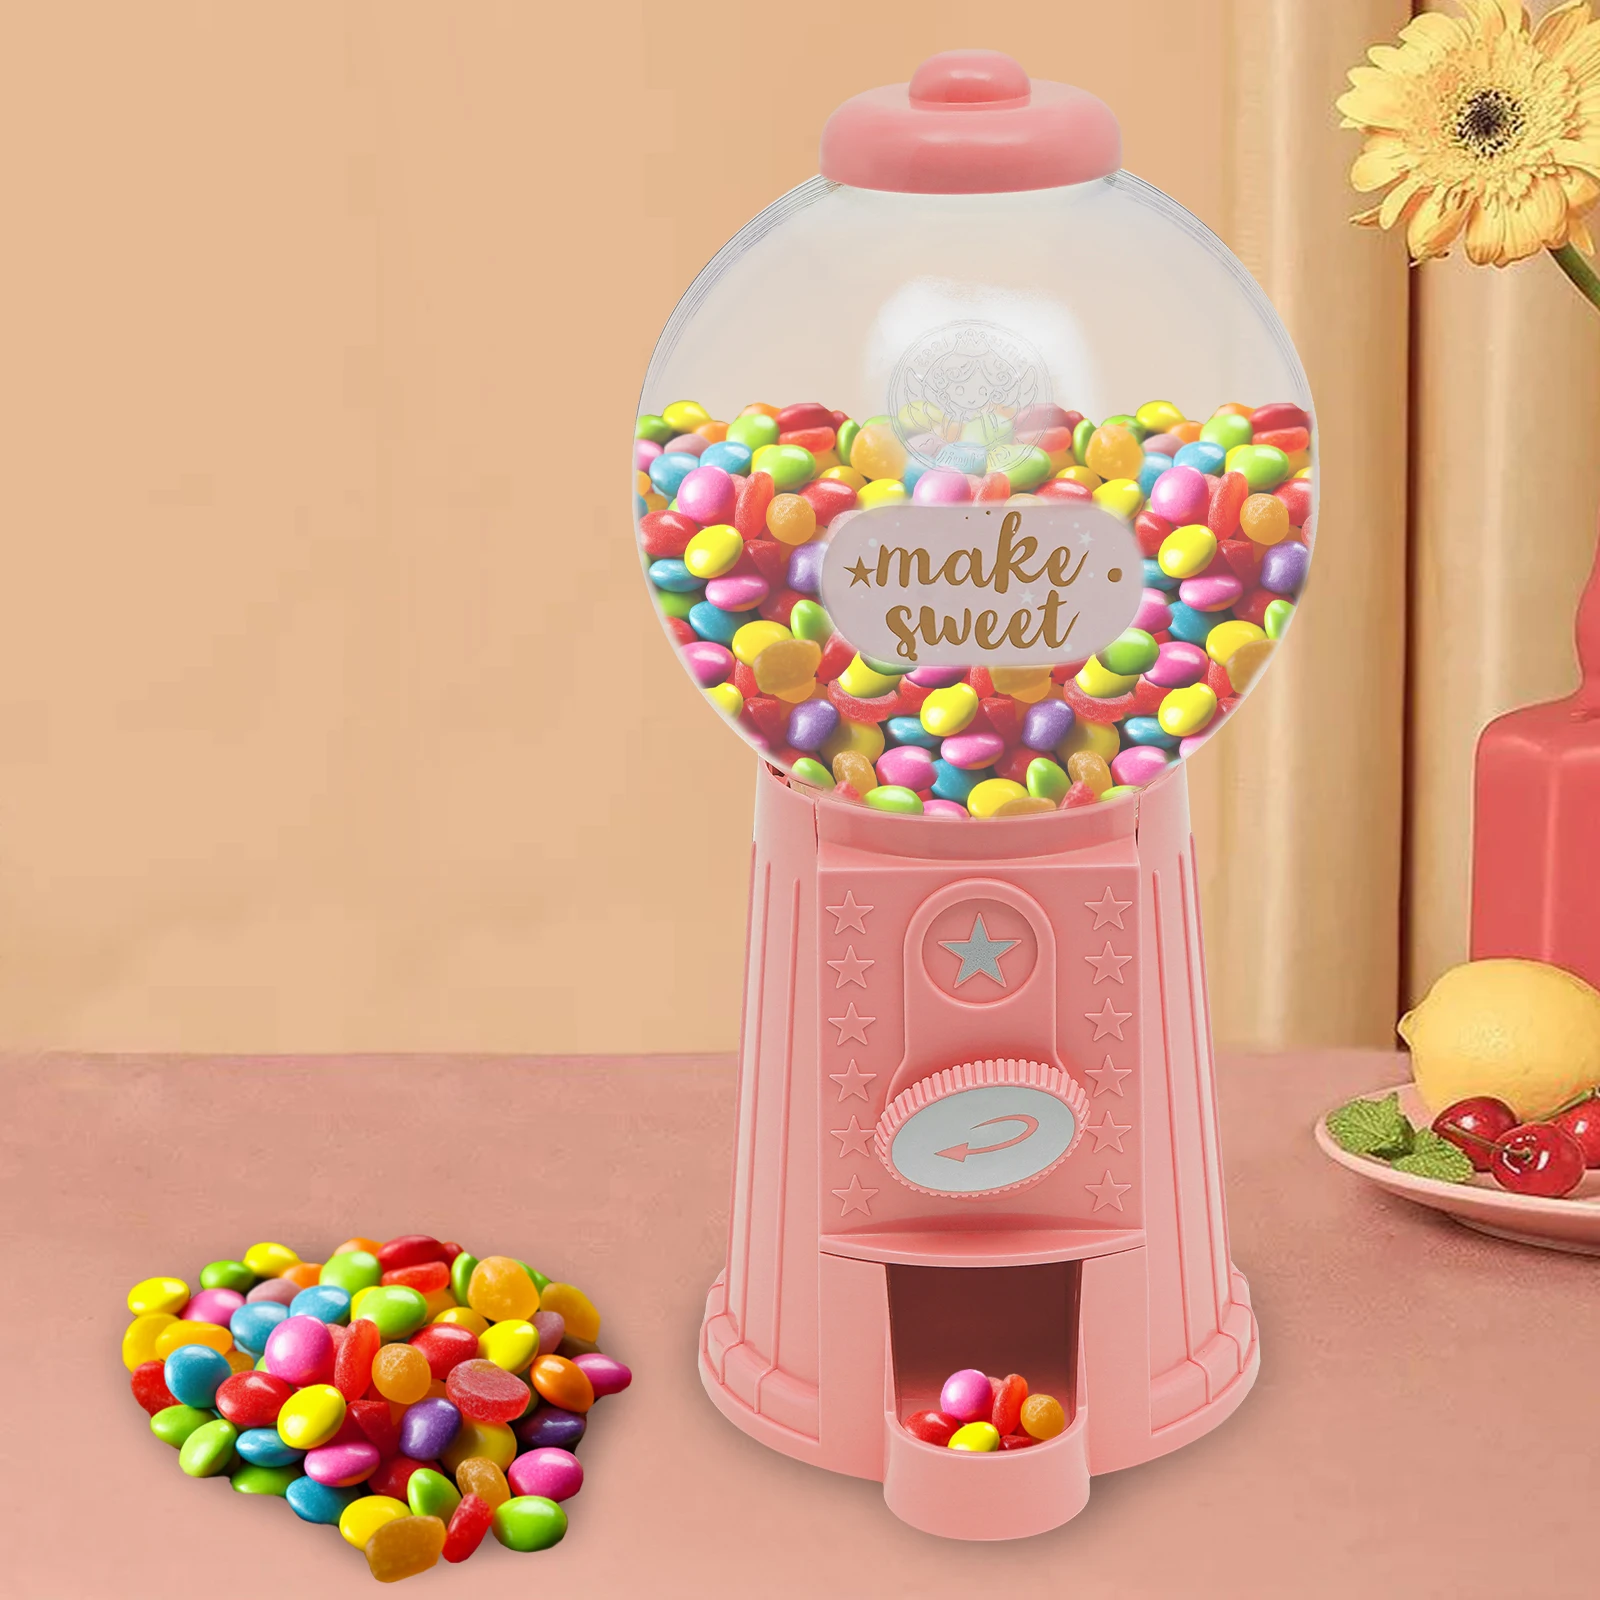 

Gumball Machine, Cute Candy Dispenser Machine Mini Vending Machine for Candy Gift Toys Knob and Candy Exit Bubble Gum Machine